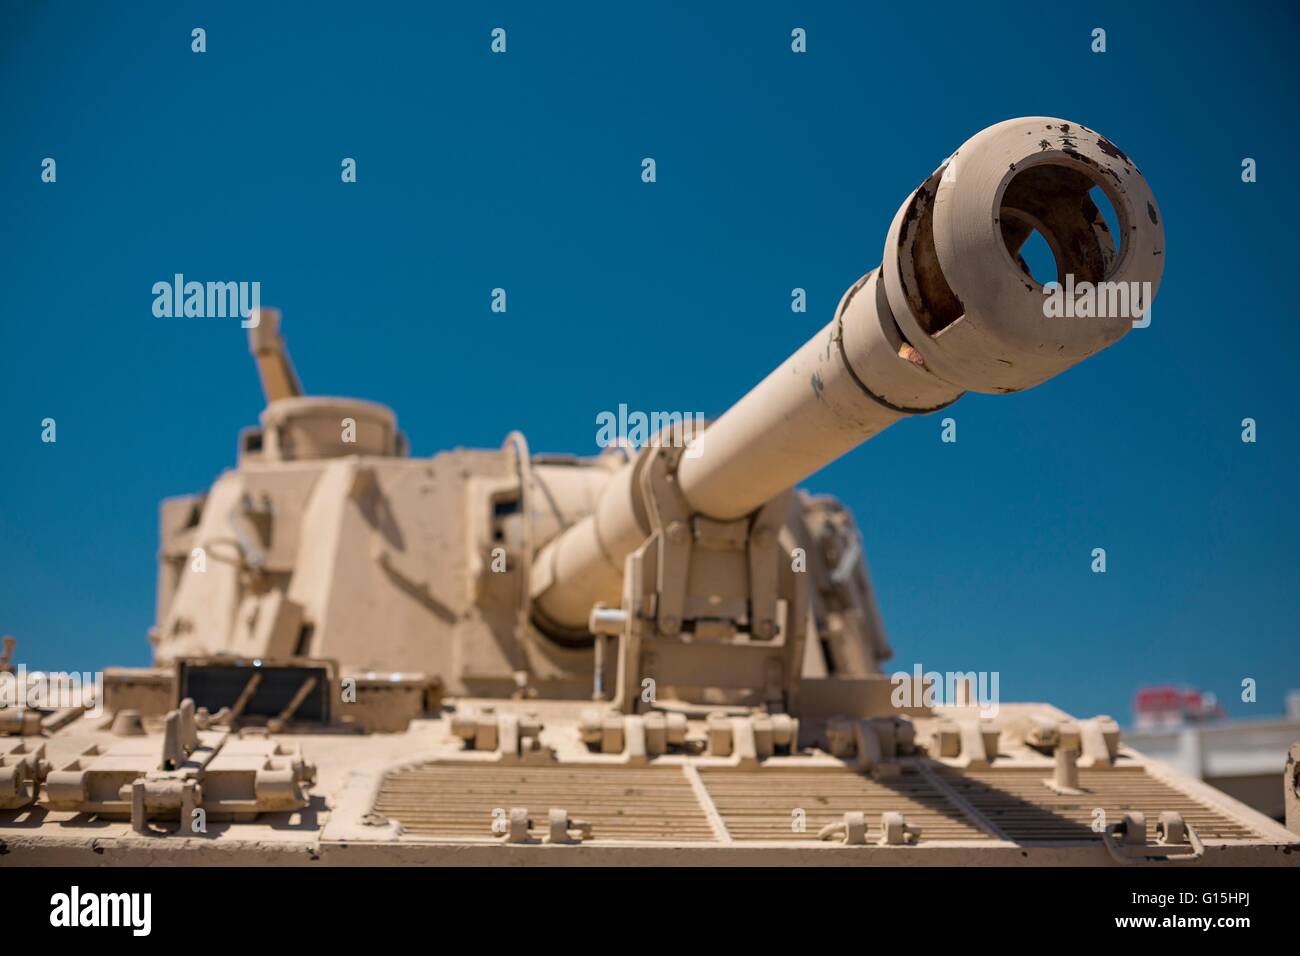 Heavy military desert camouflage tank turret gun aiming and ready to fire Stock Photo